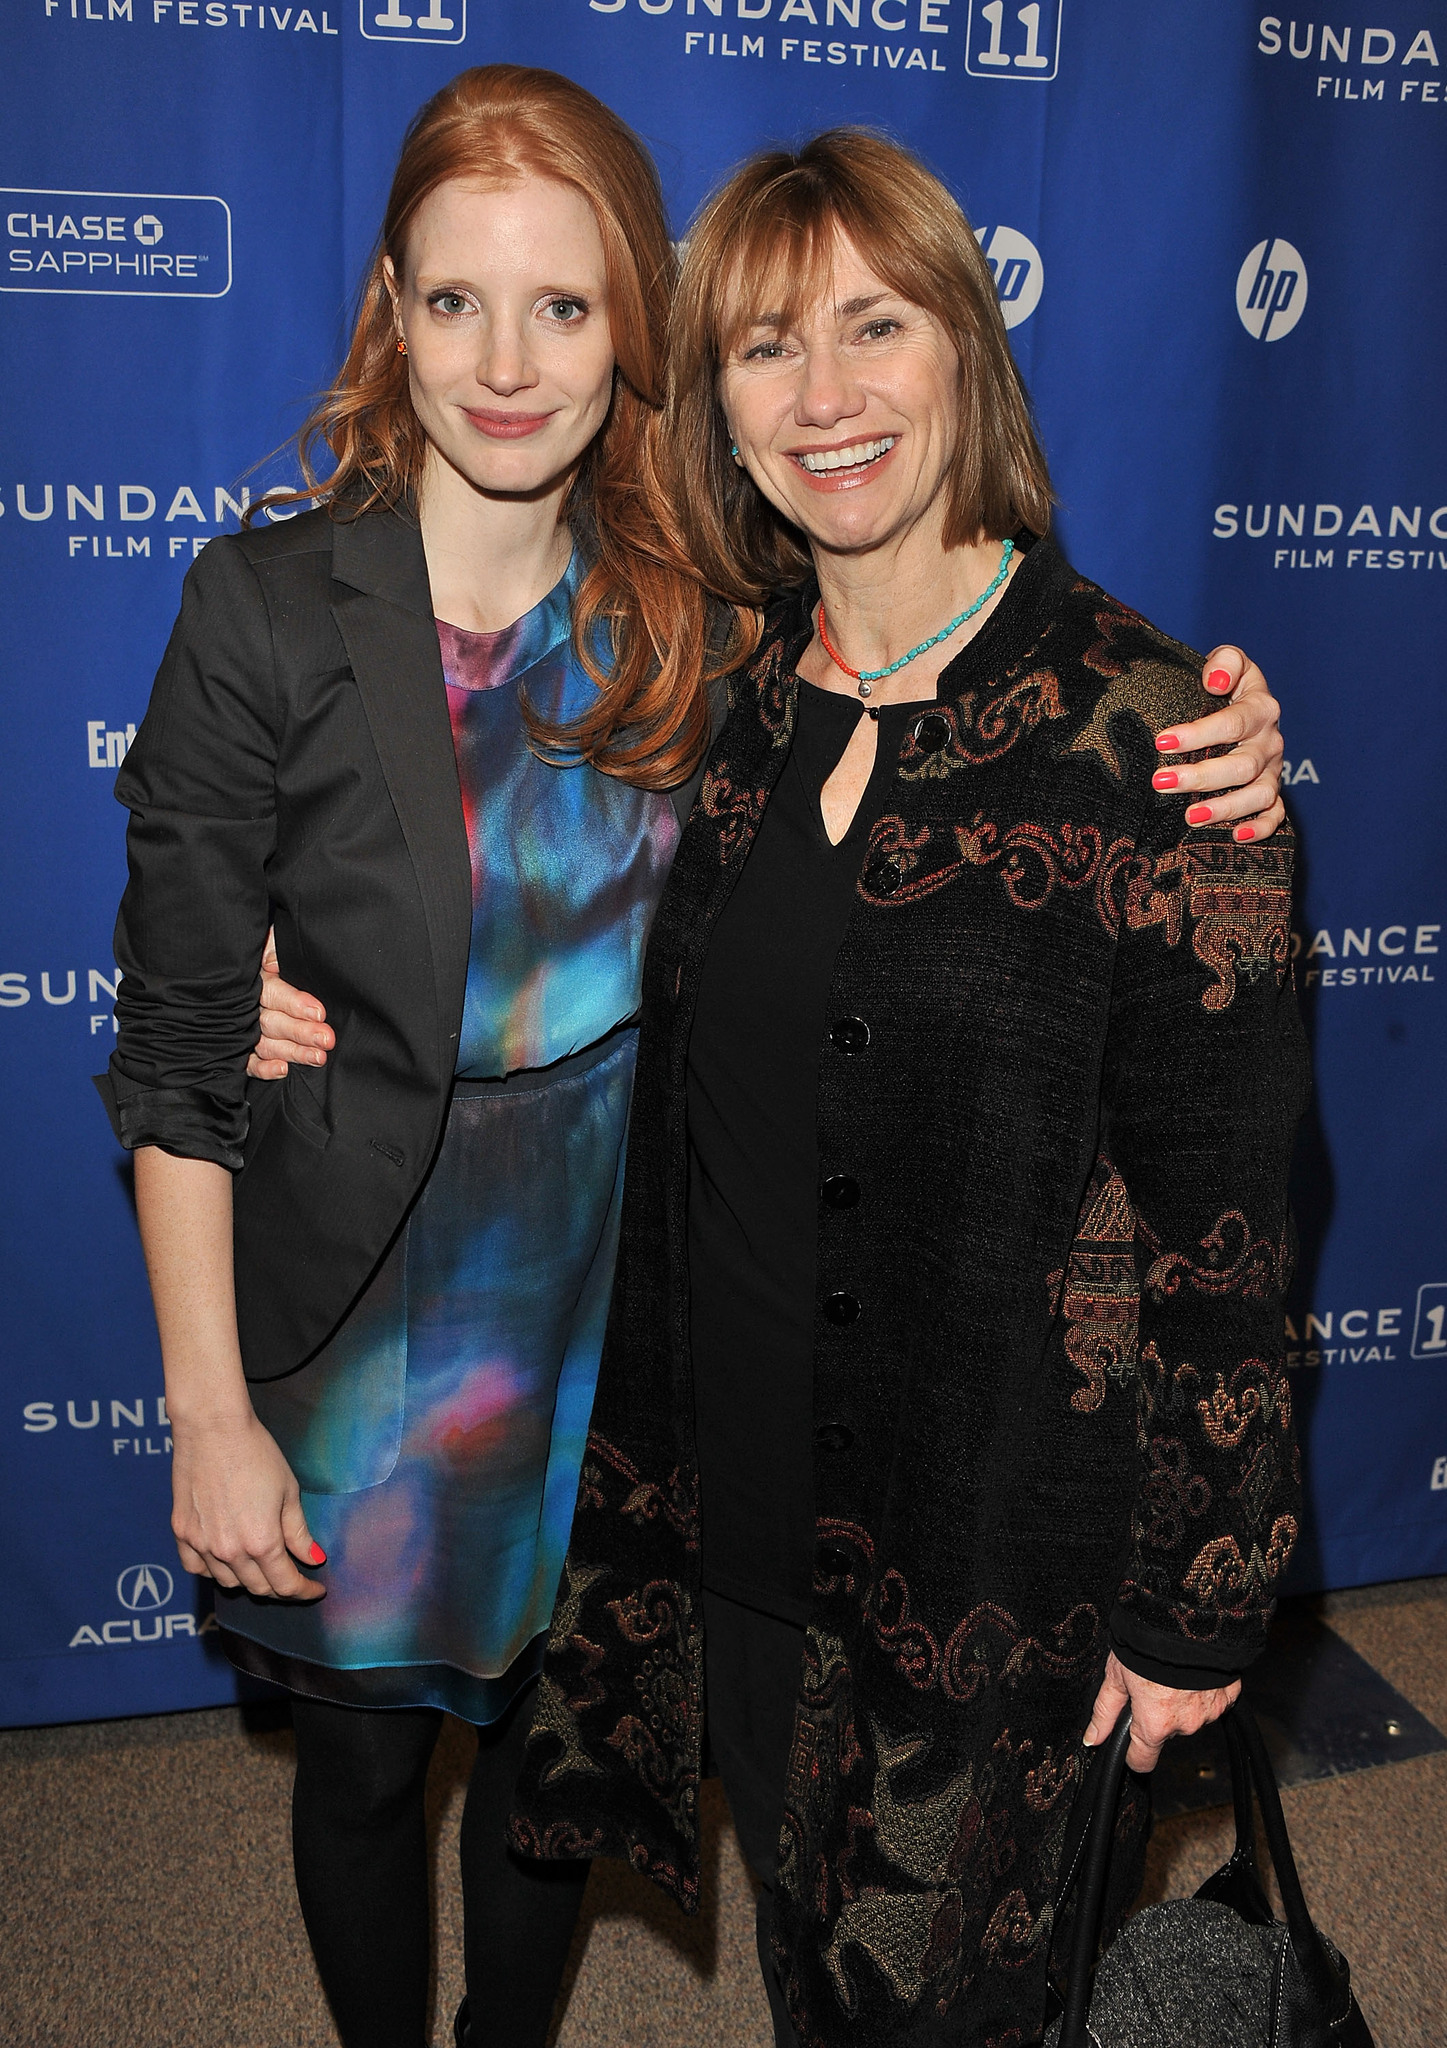 Kathy Baker and Jessica Chastain